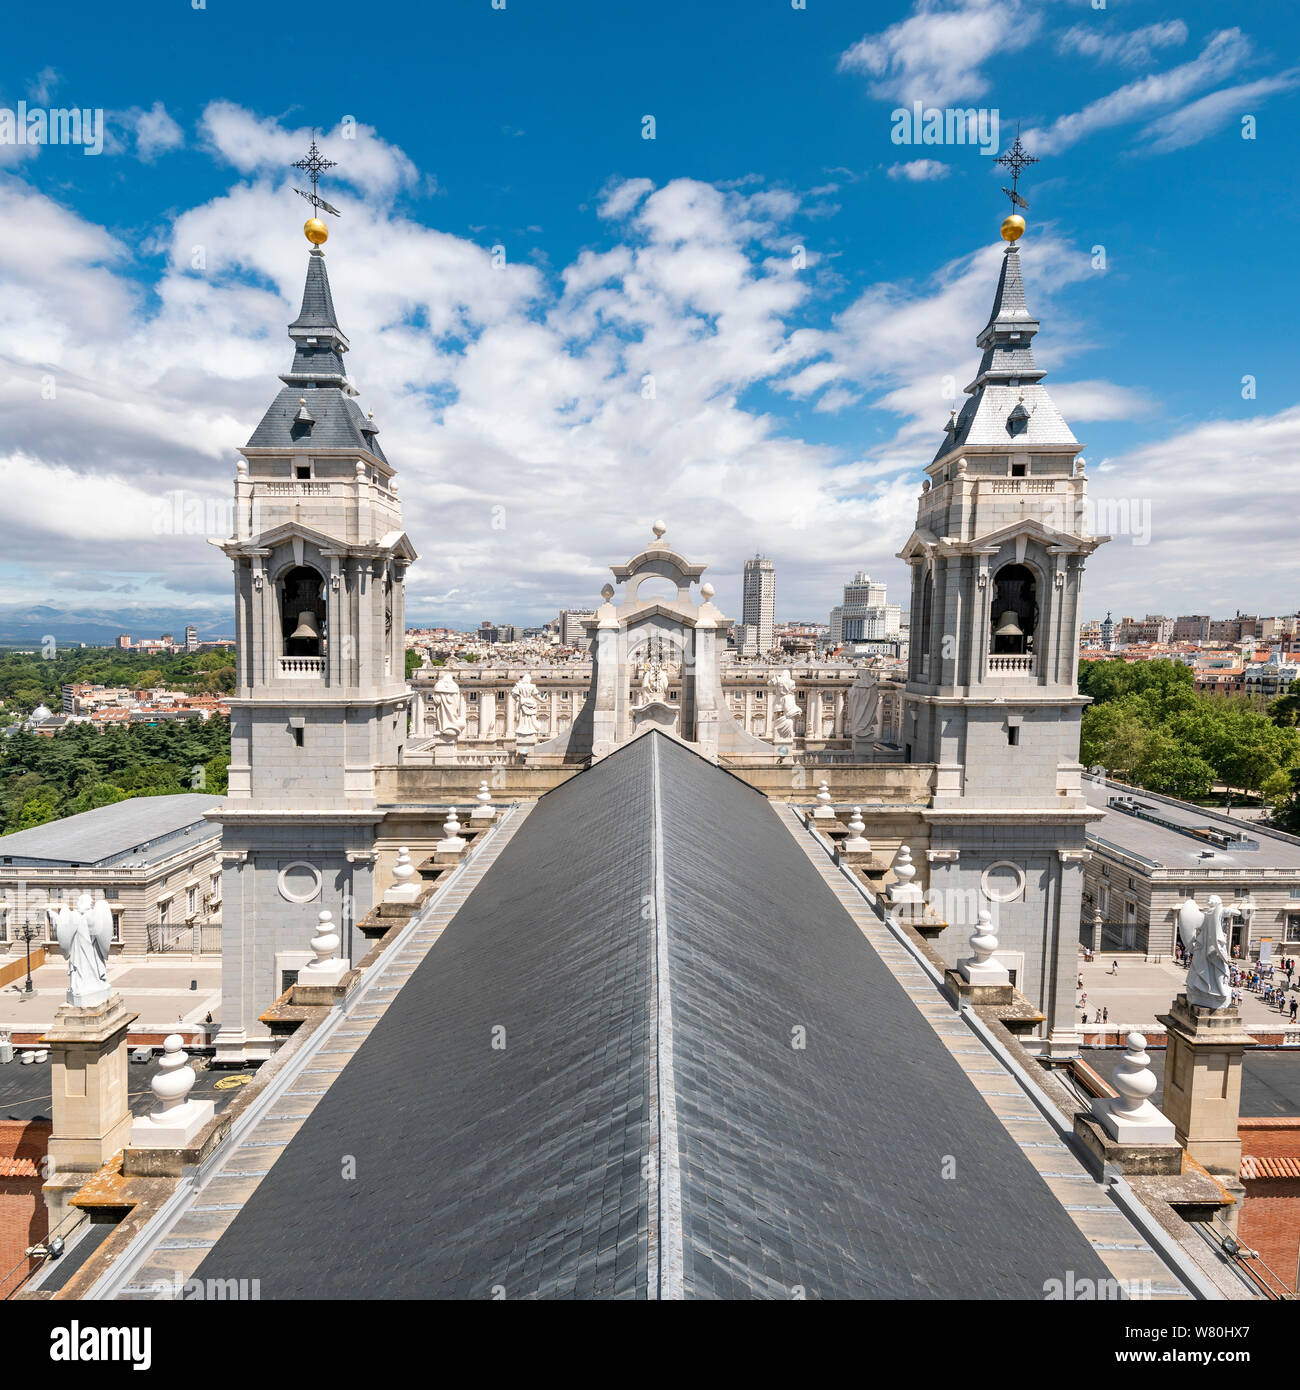 Square aerial view over the rooftop of the Almudena Cathedral in Madrid. Stock Photo